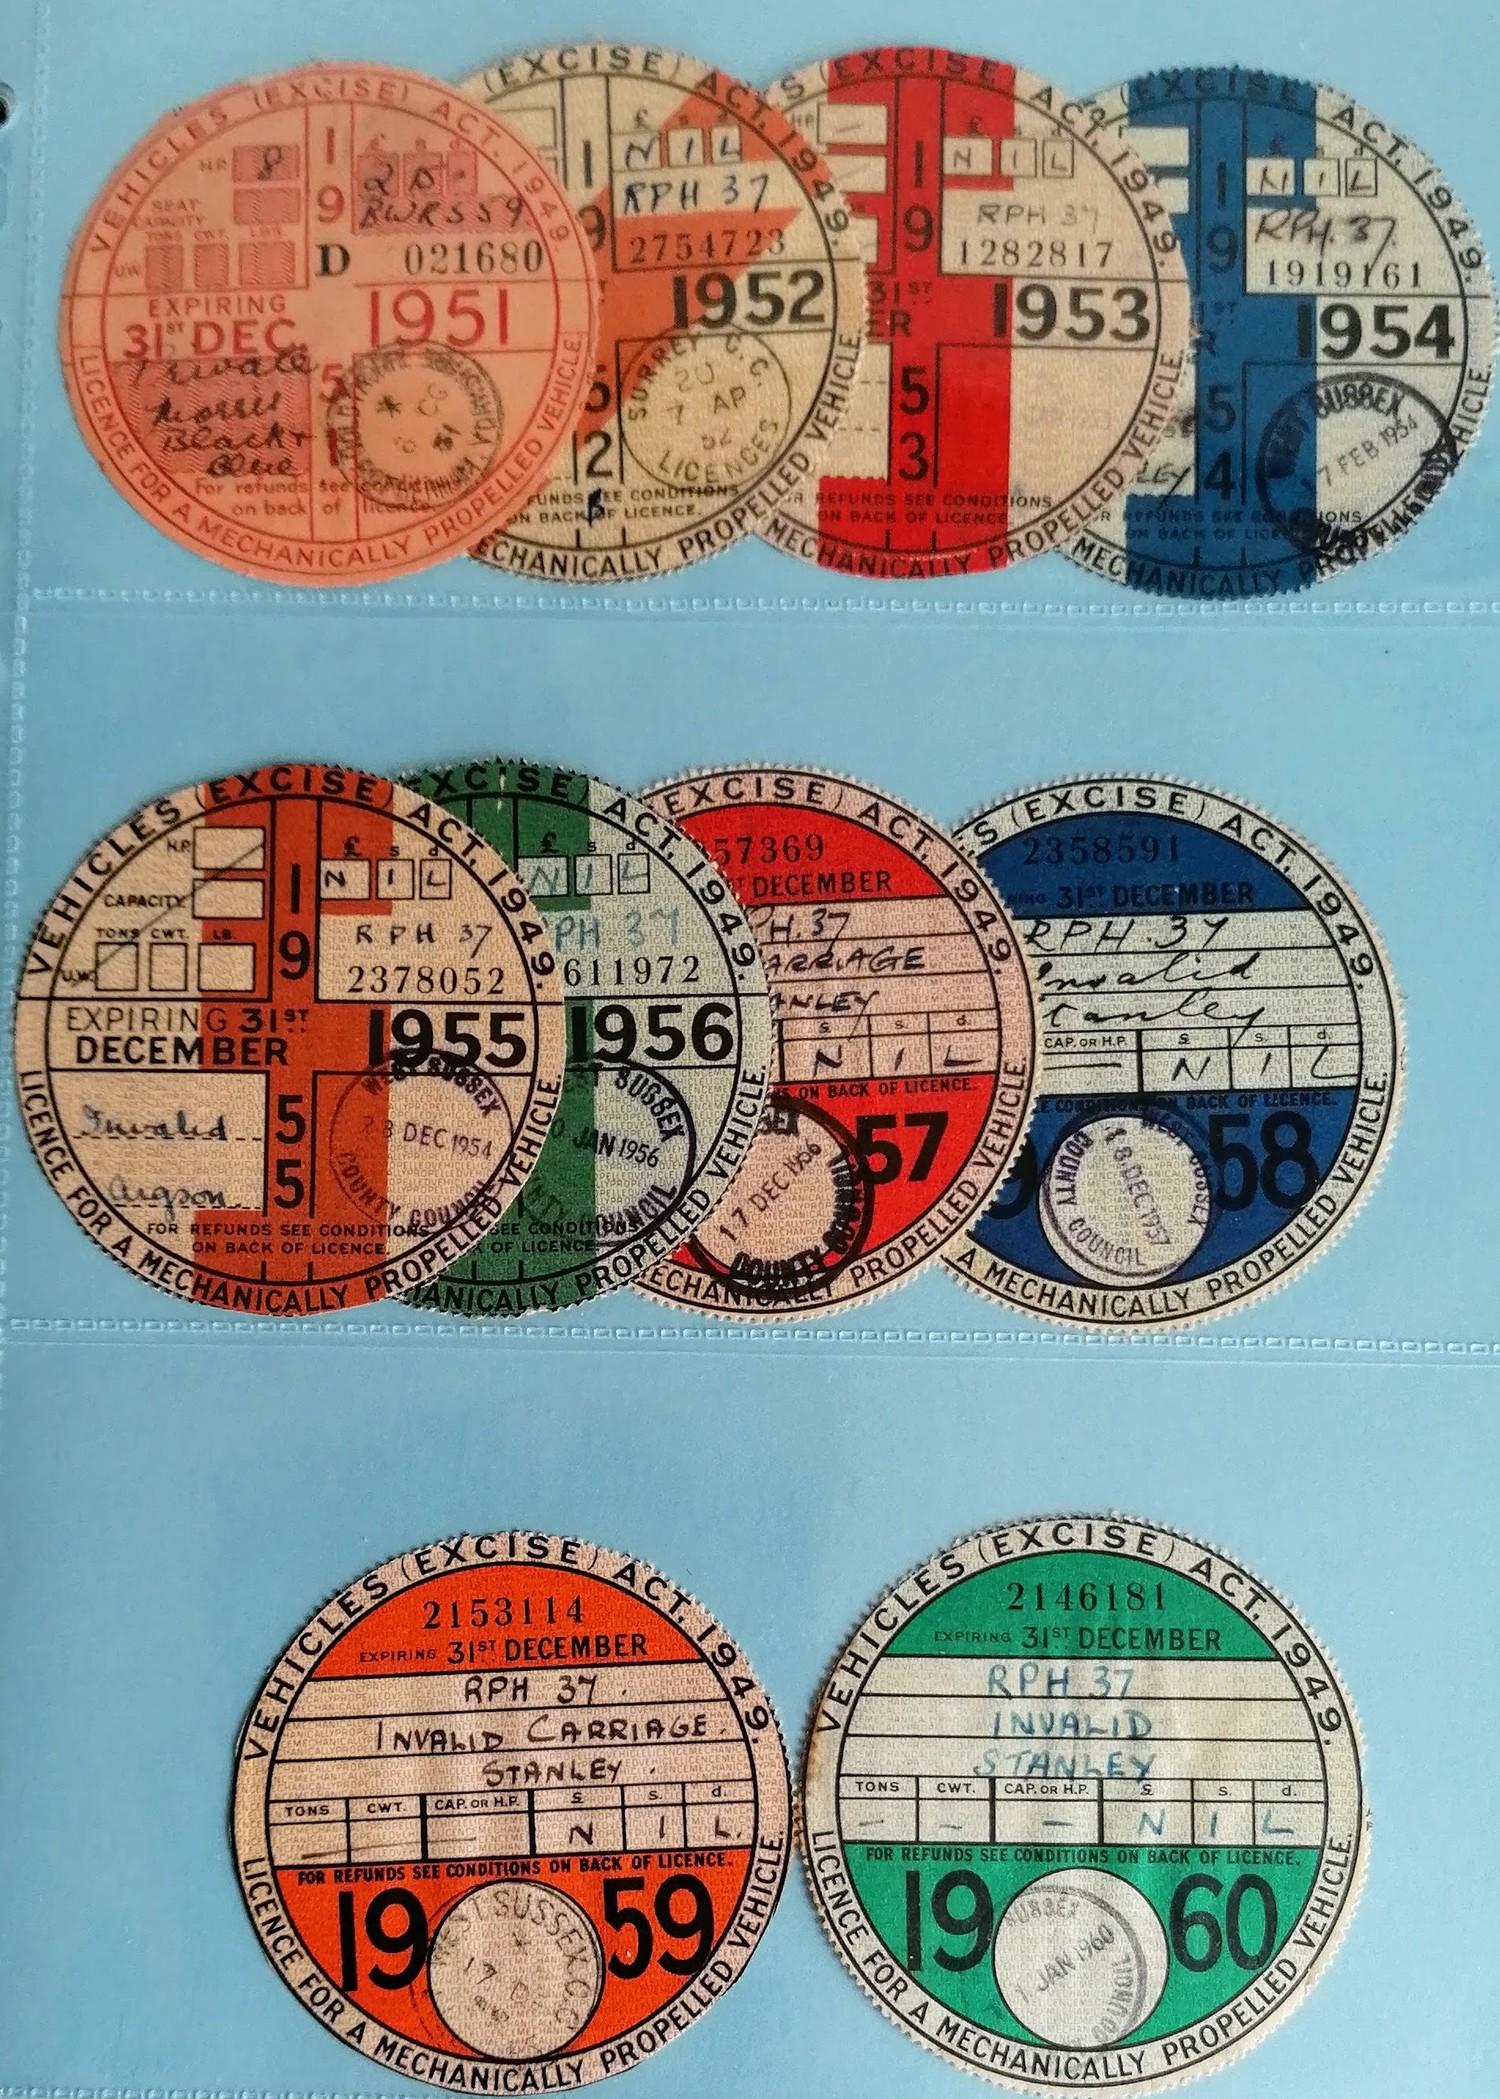 A unique and complete collection of over 5,023 original British vehicle Tax Discs from 1921 to 2015 - Image 8 of 33